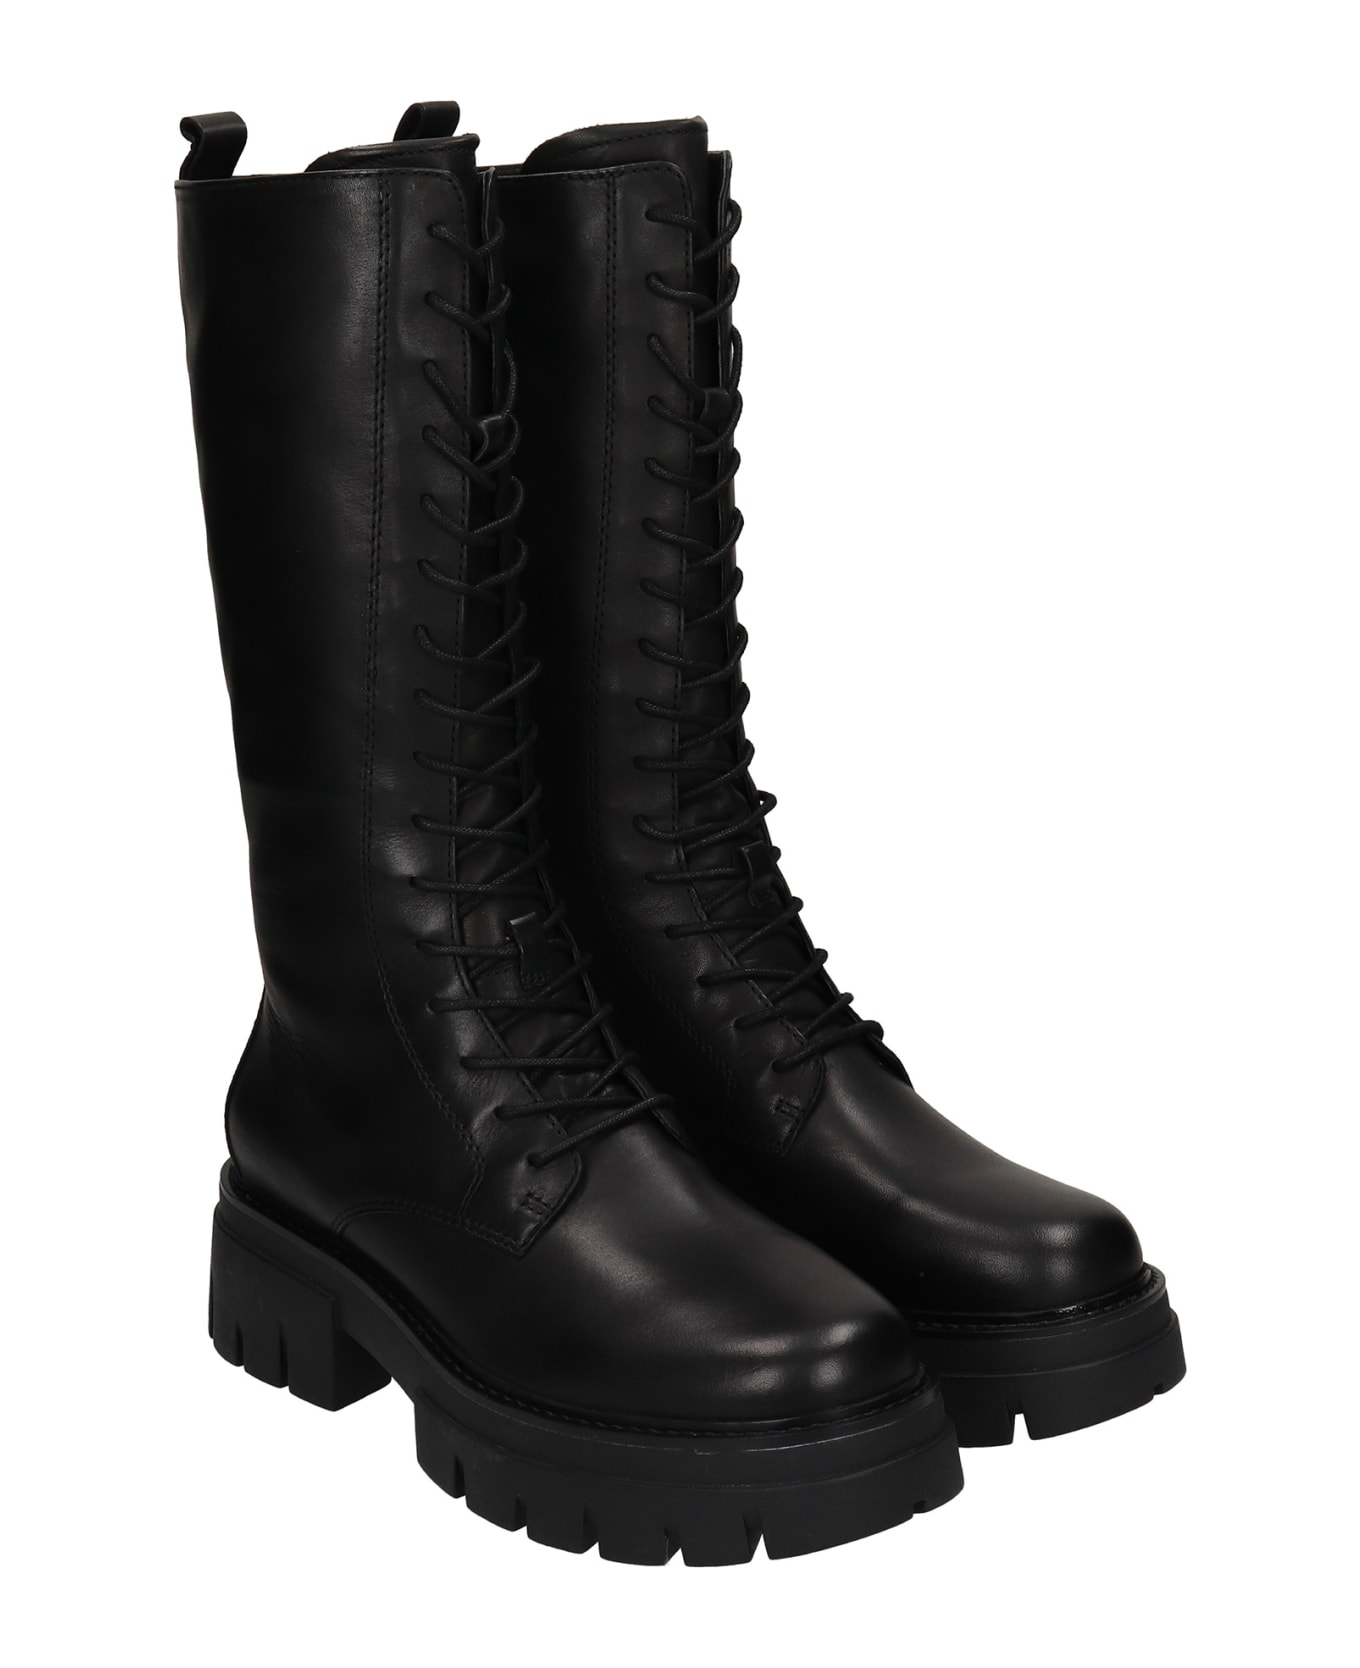 Ash Lullaby Combat Boots In Black Leather - Nero